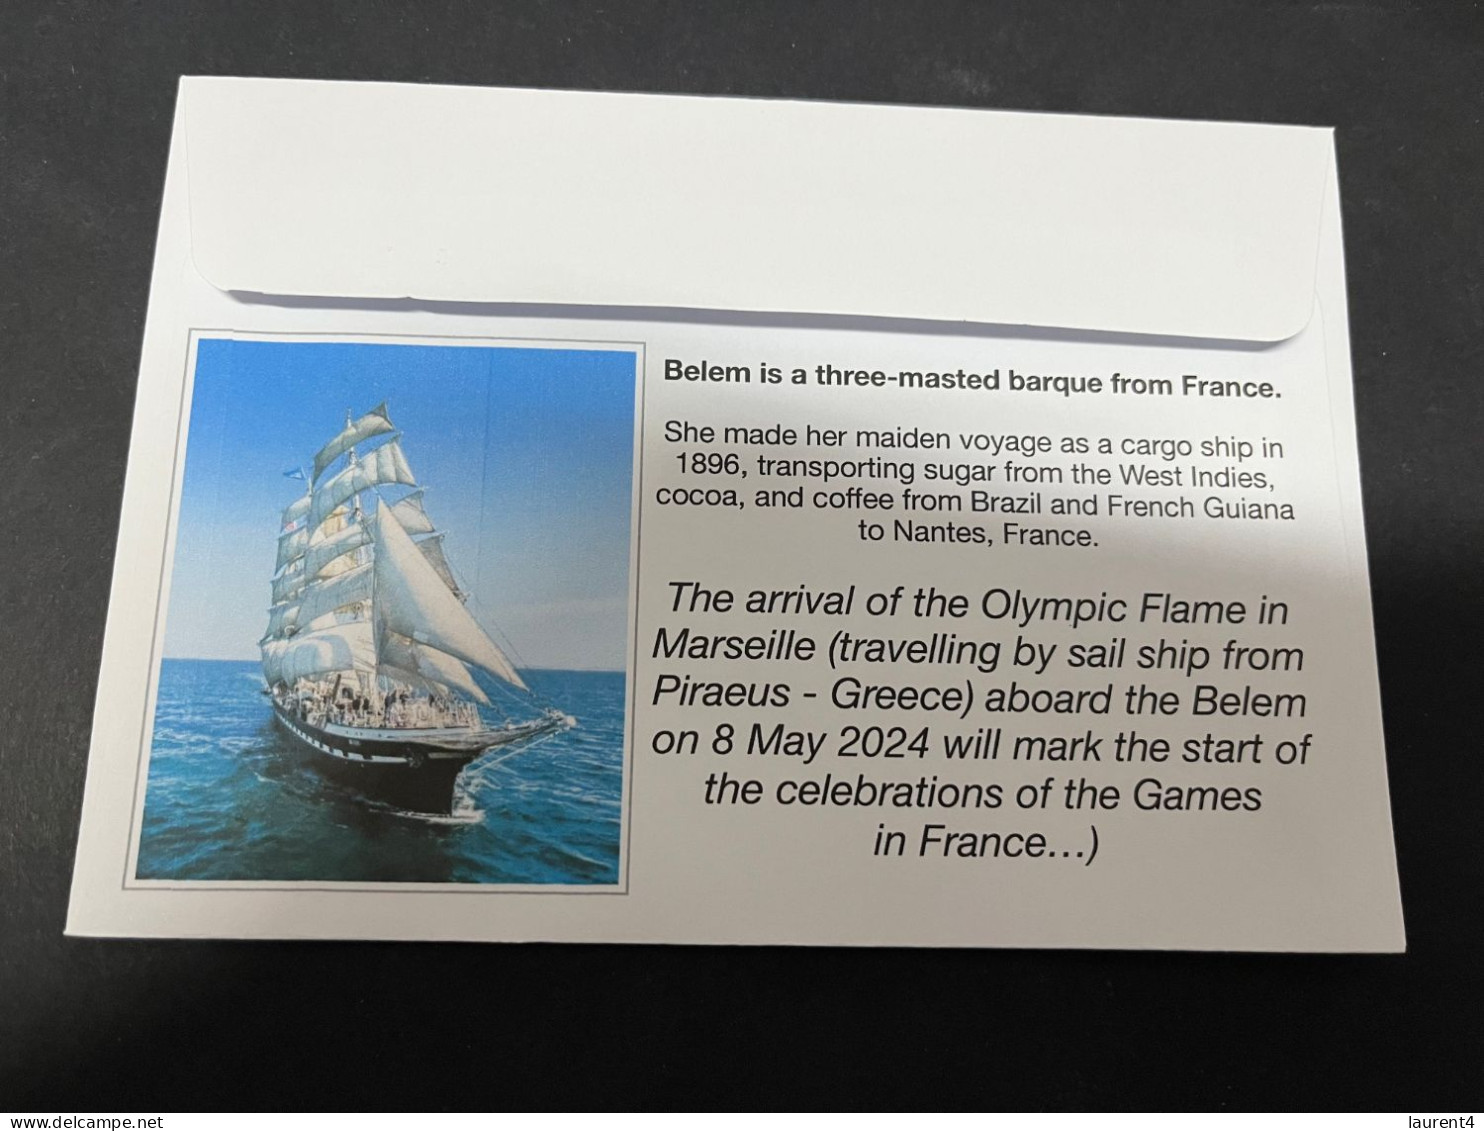 19-5-2024 (5 Z 32) Paris Olympic Games 2024 - The Olympic Flame Travel On Sail Ship BELEM (1 Cover) - Summer 2024: Paris